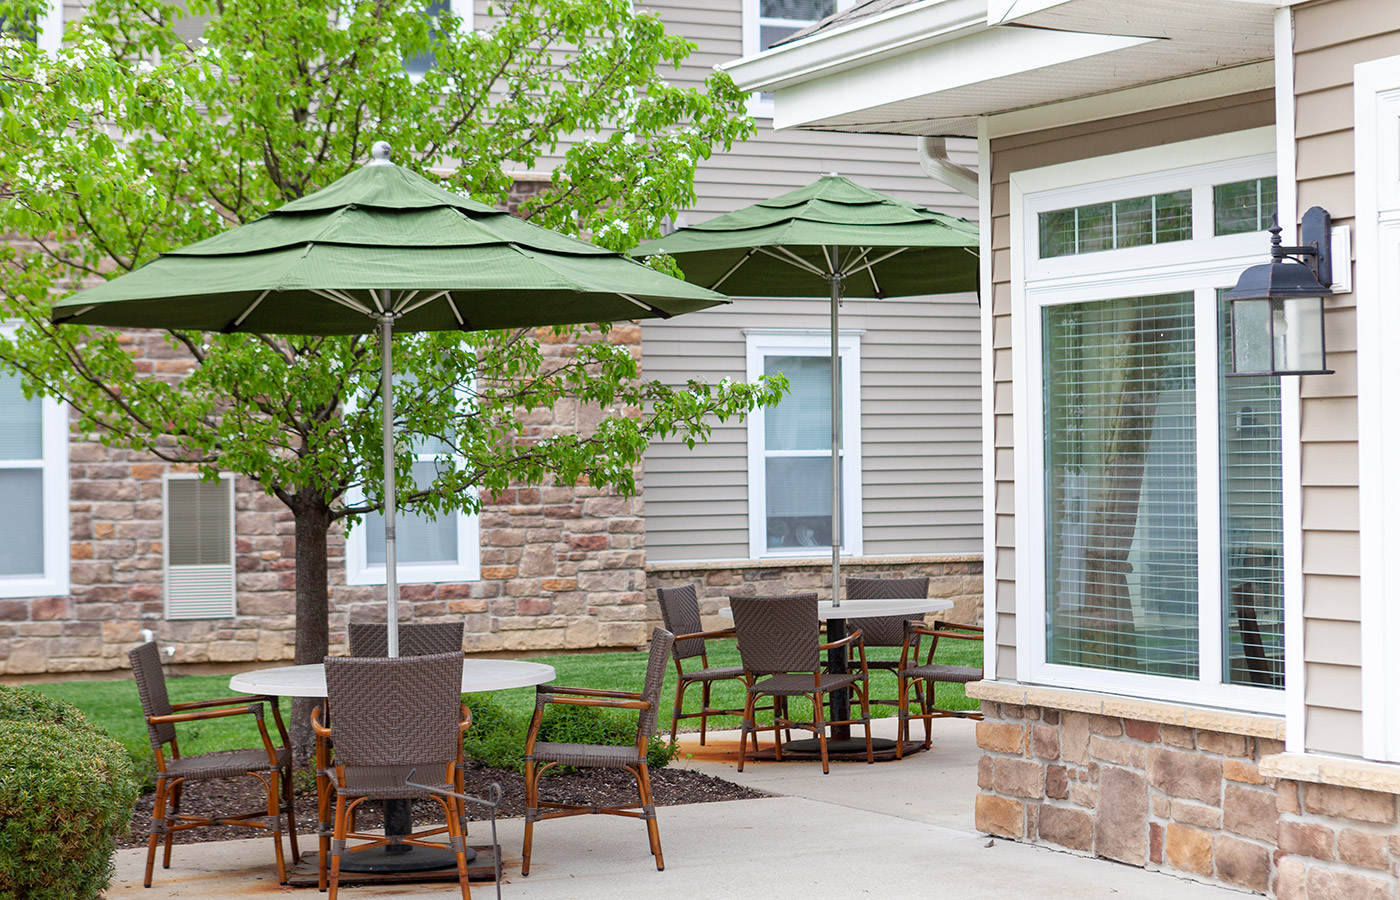 Patio table with umbrella and chairs.